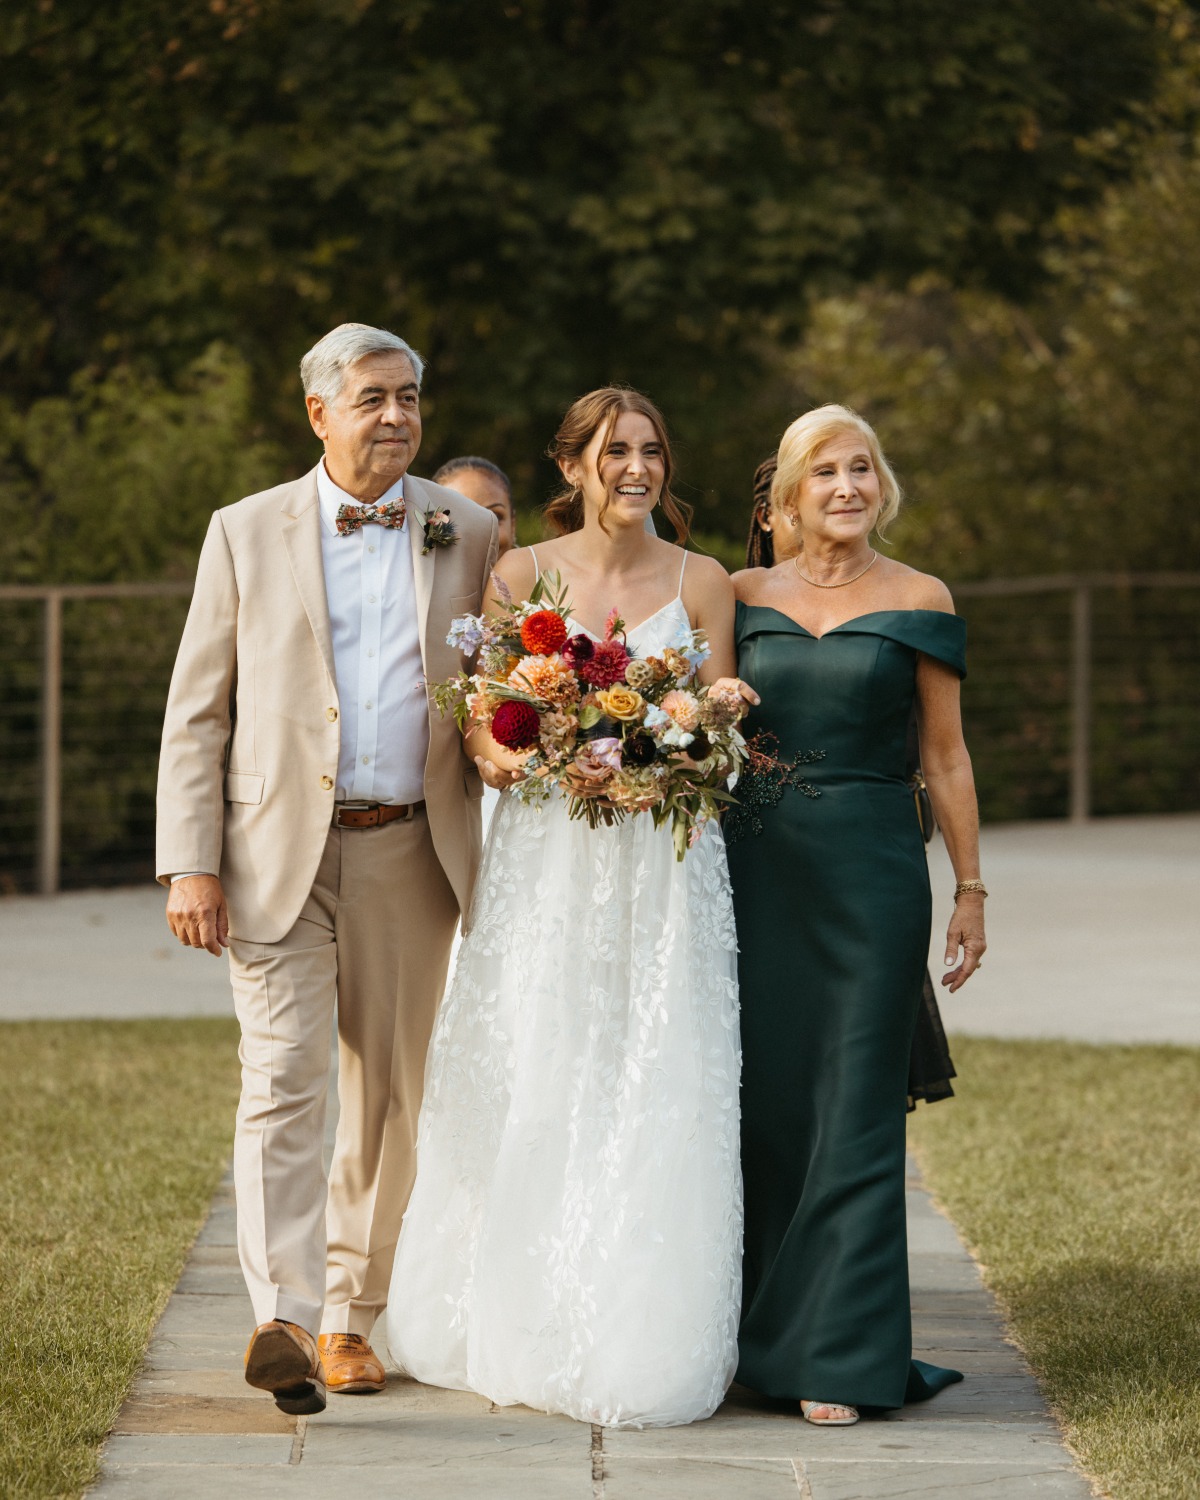 Emotional bride walking down aisle with elegant mother and father